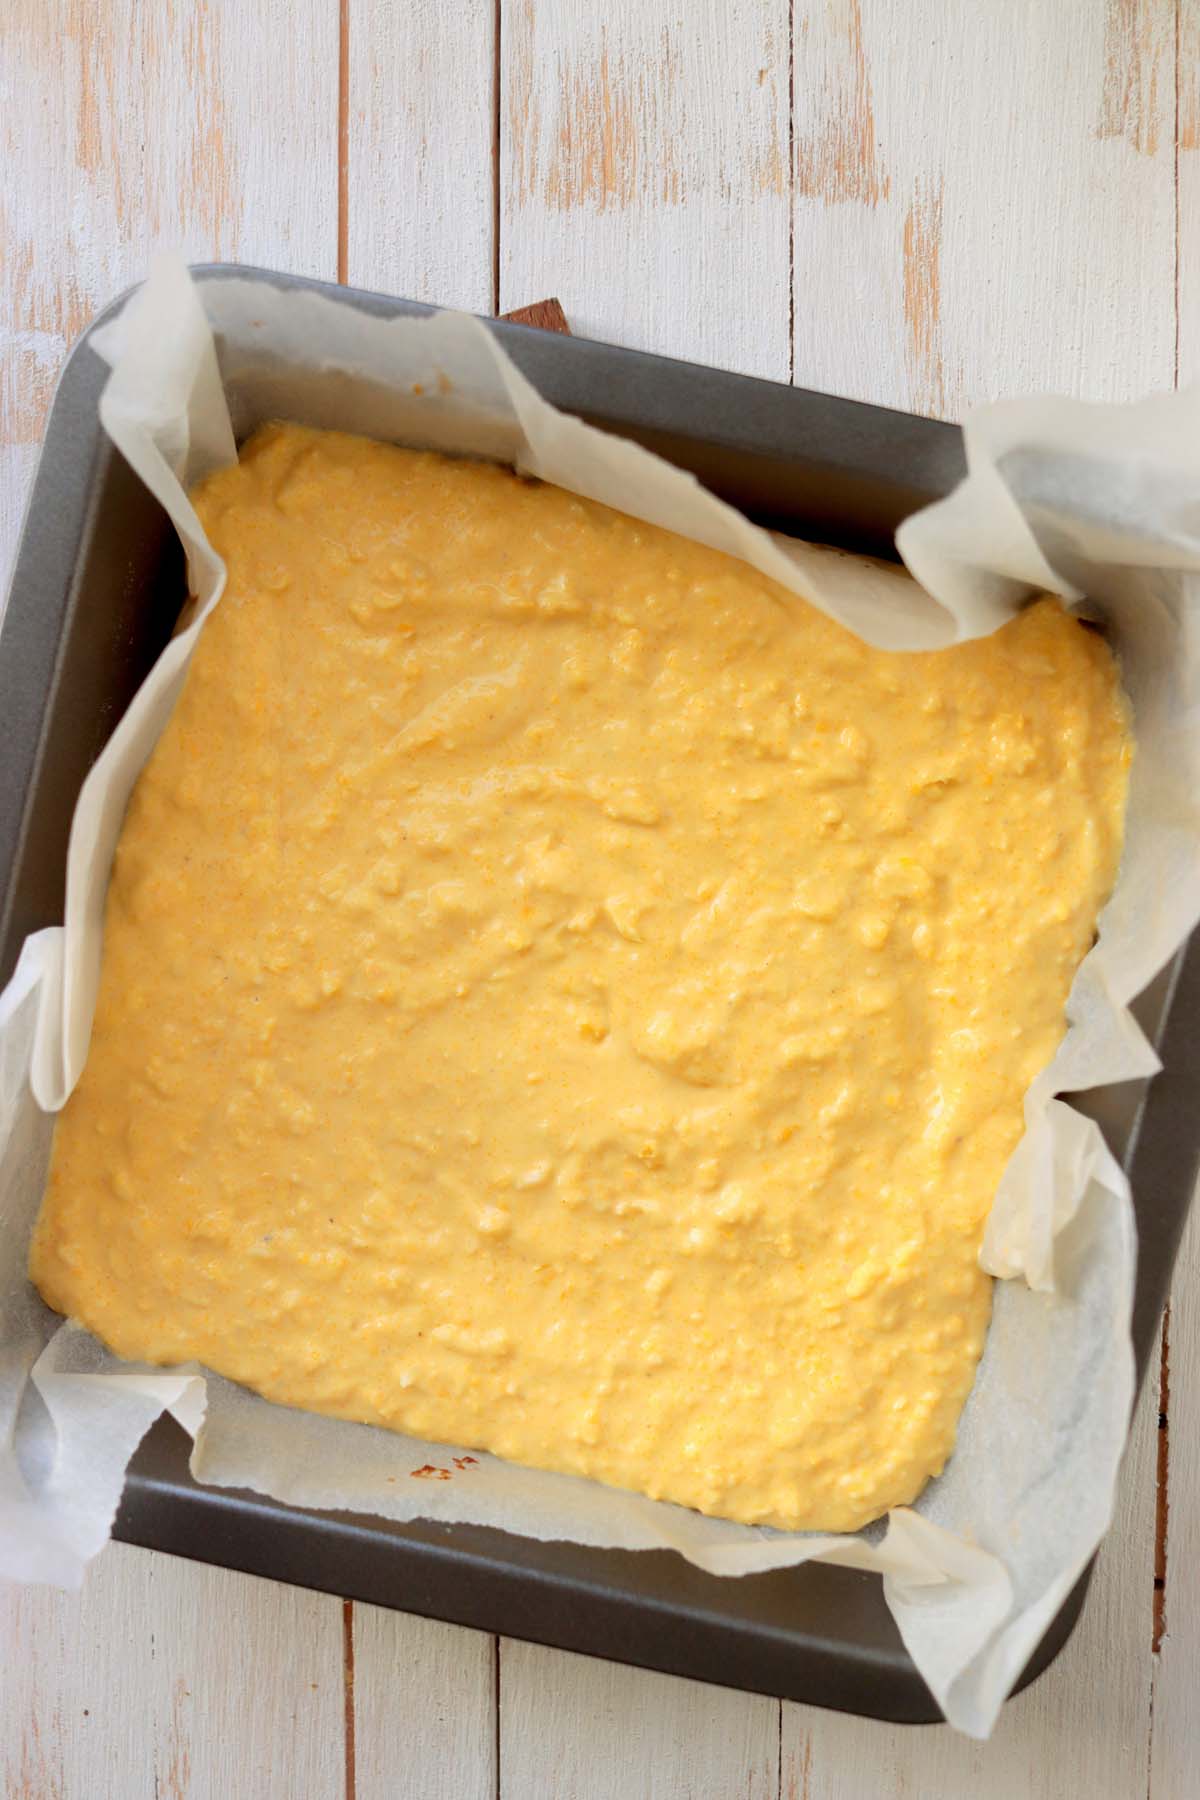 Cornbread batter in a baking pan lined with parchment paper.